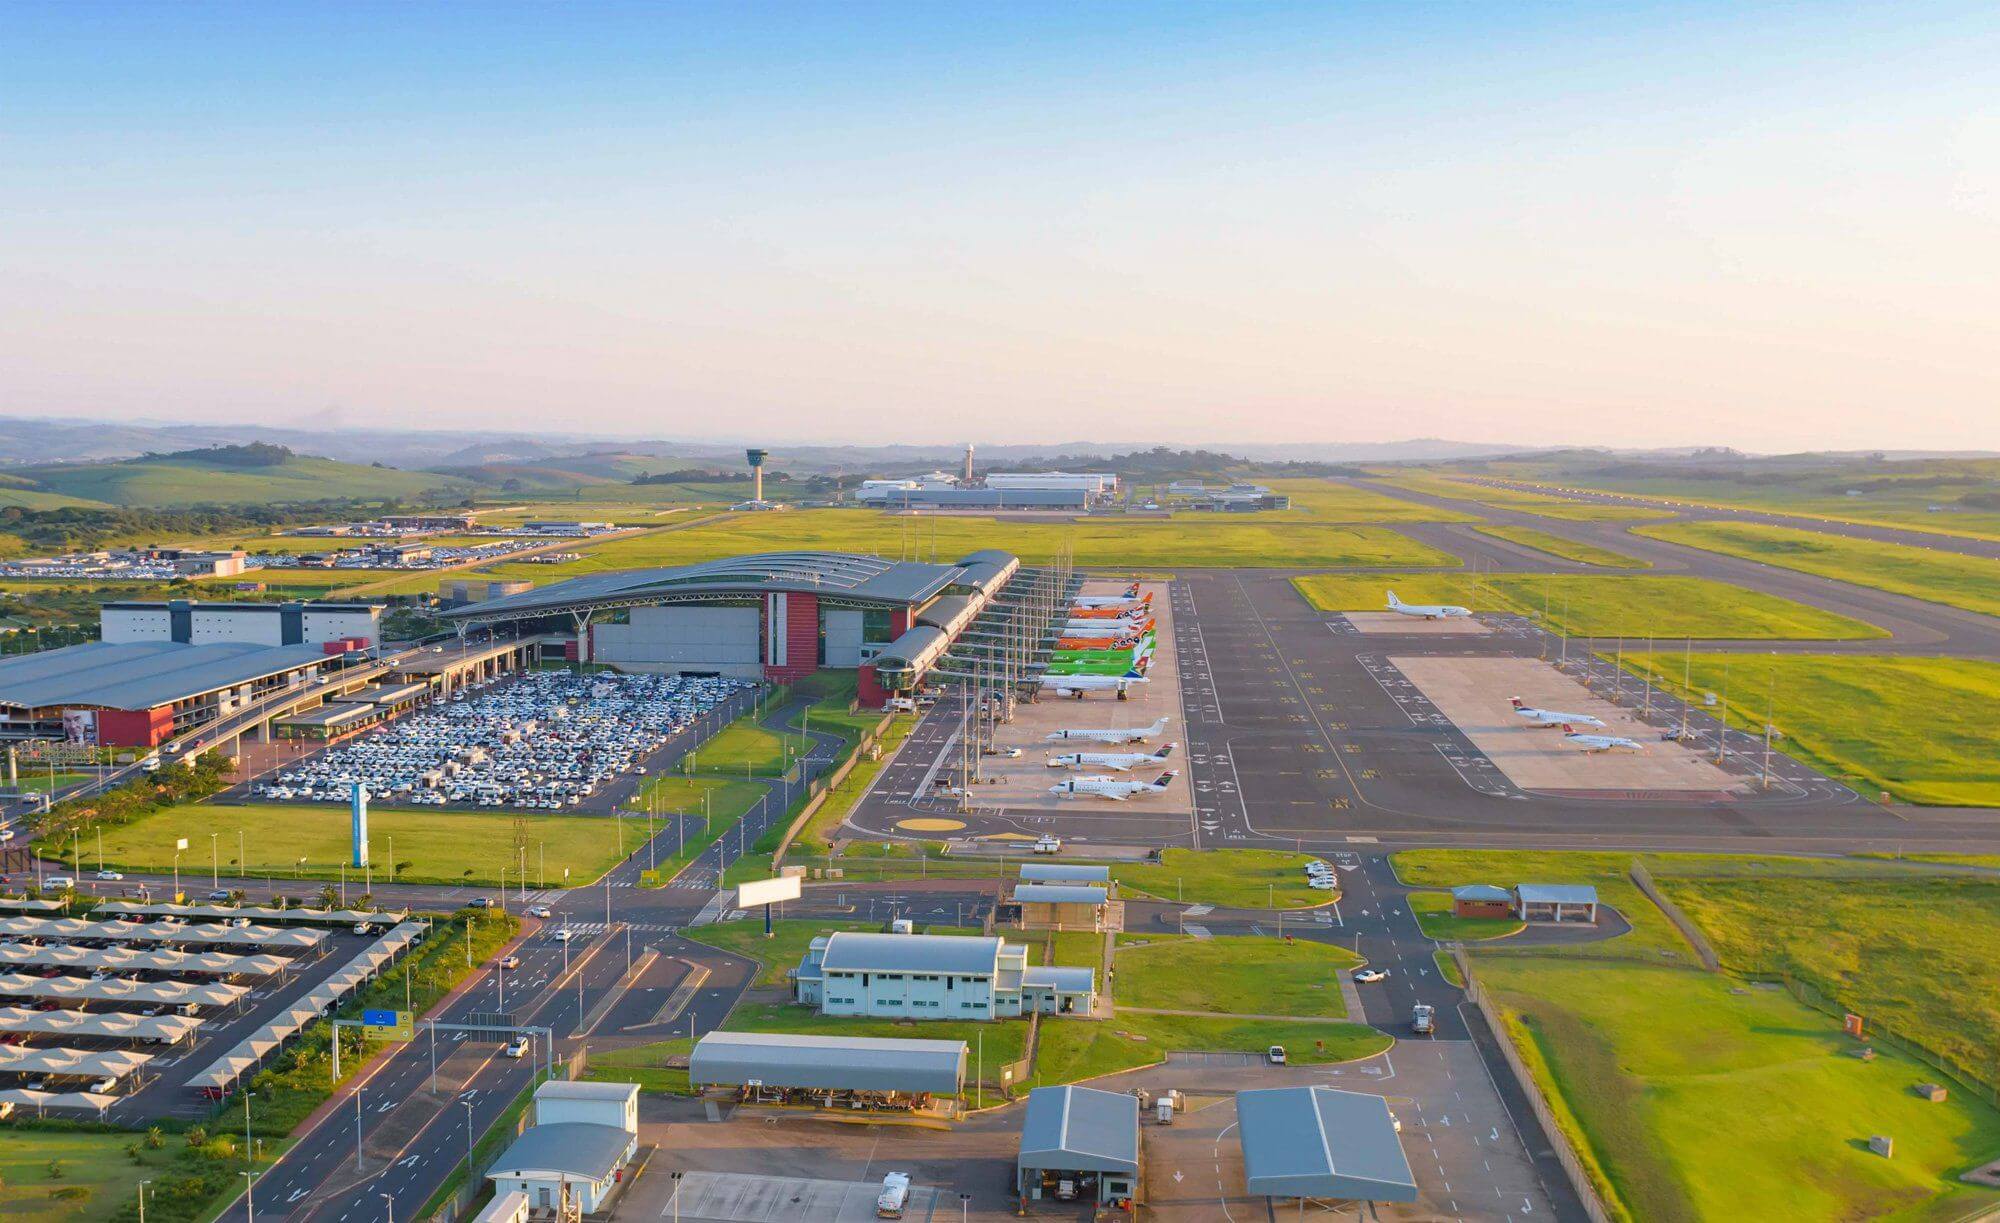 If you’re thinking of investing in South Africa, it’s worth looking at some of the rapidly developing industrial hubs that are evolving in strategic locations around the country.